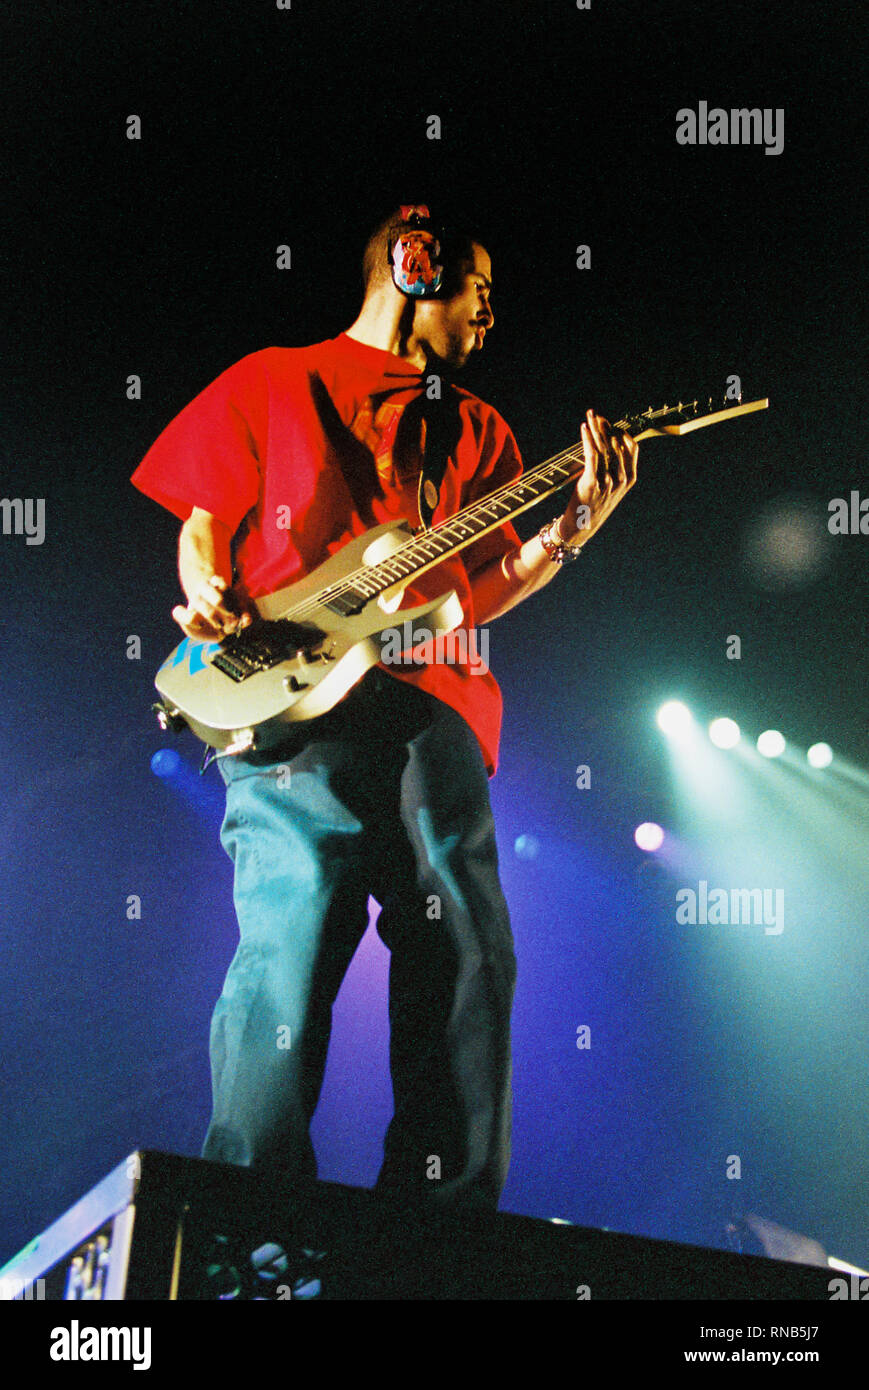 Brad Delson guitarist in Linkin Park performing at the London Docklands Arena 16th September 2001, London, England, united Kingdom. Stock Photo